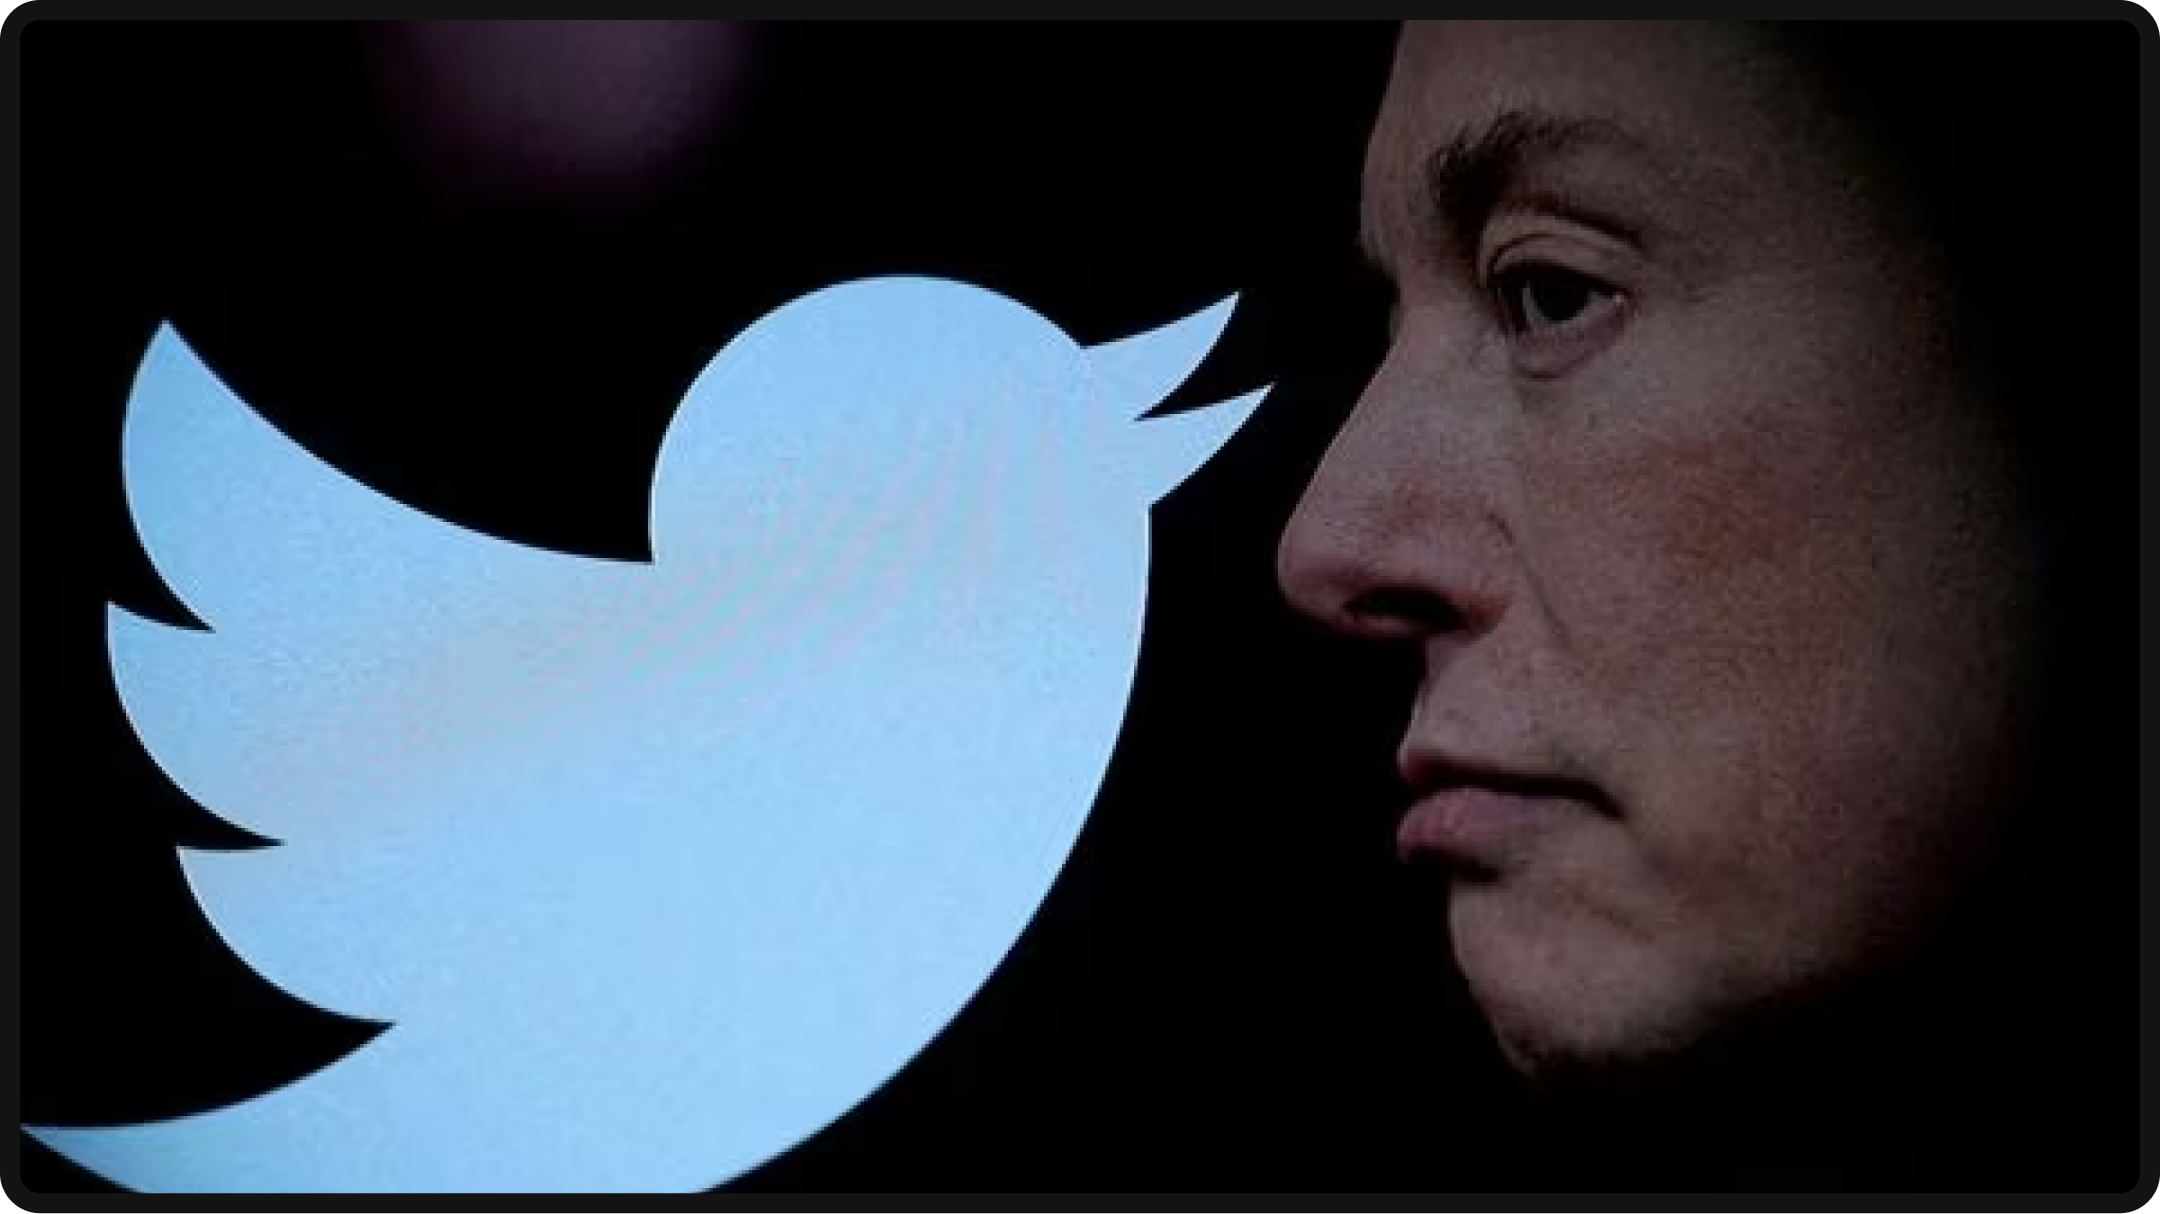 Elon Musk with the Twitter logo